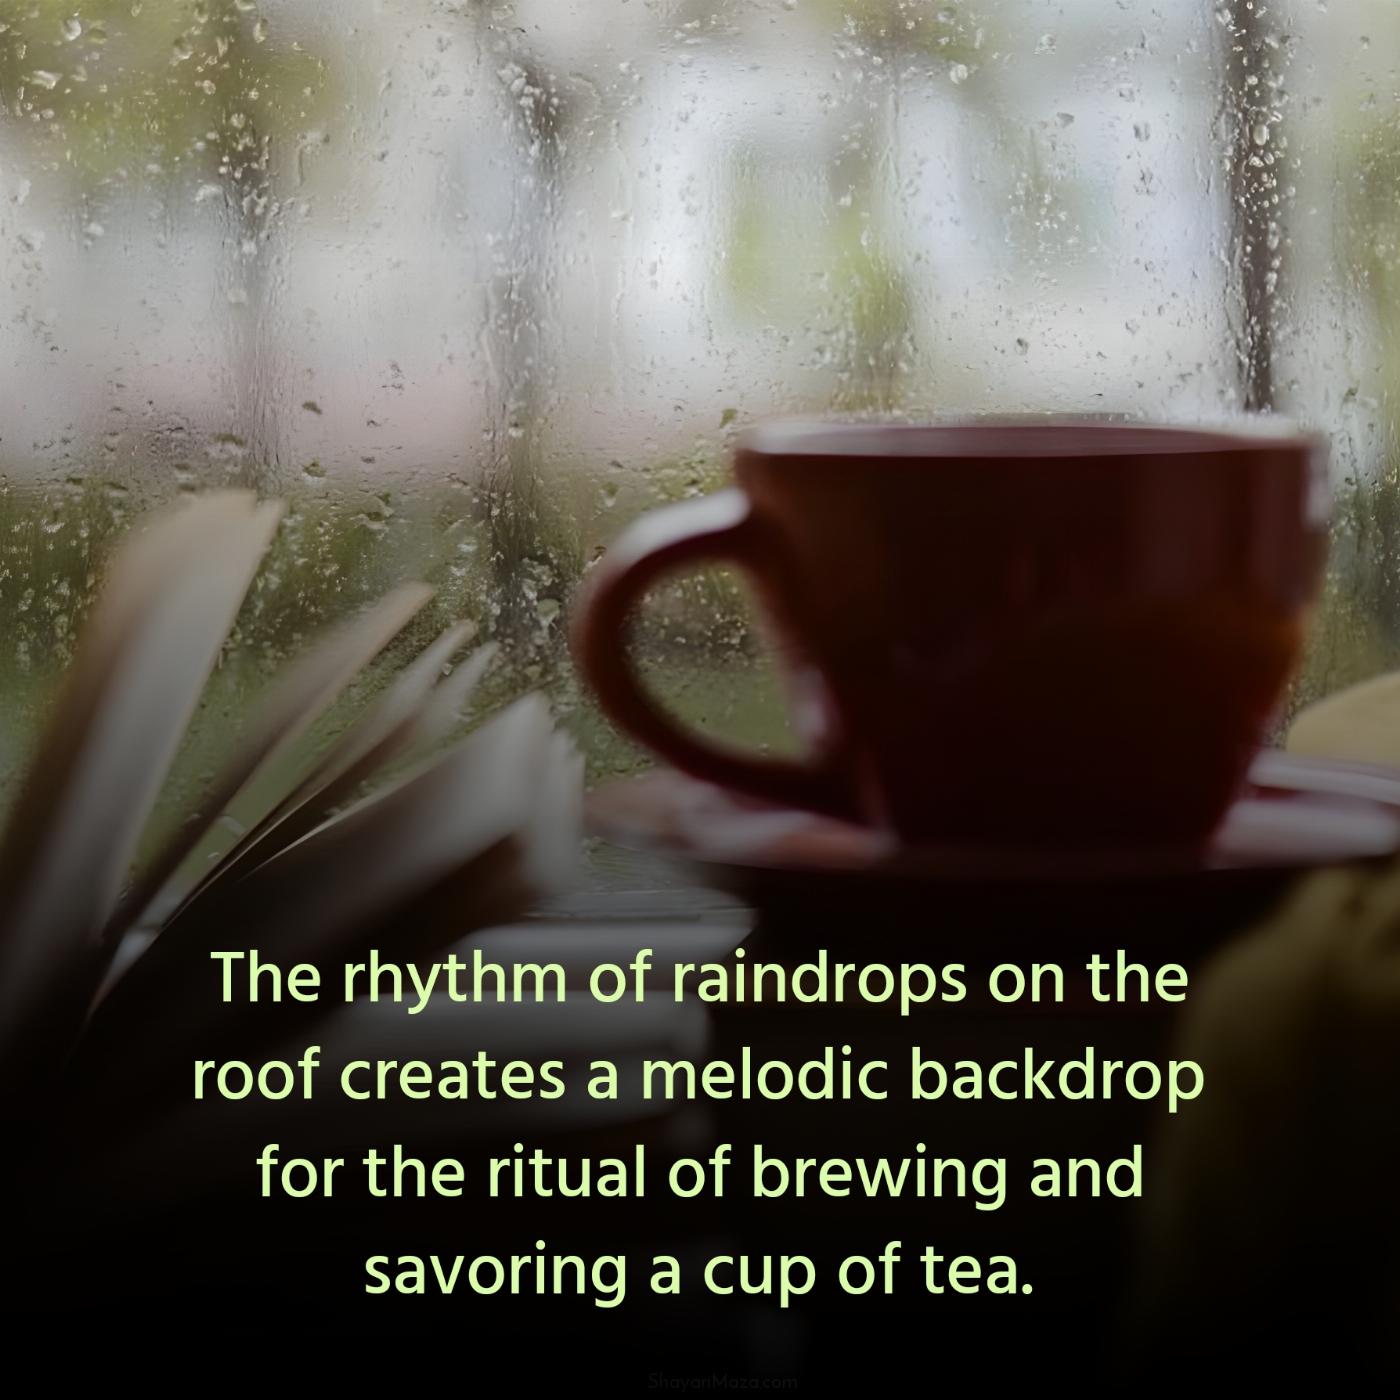 The rhythm of raindrops on the roof creates a melodic backdrop